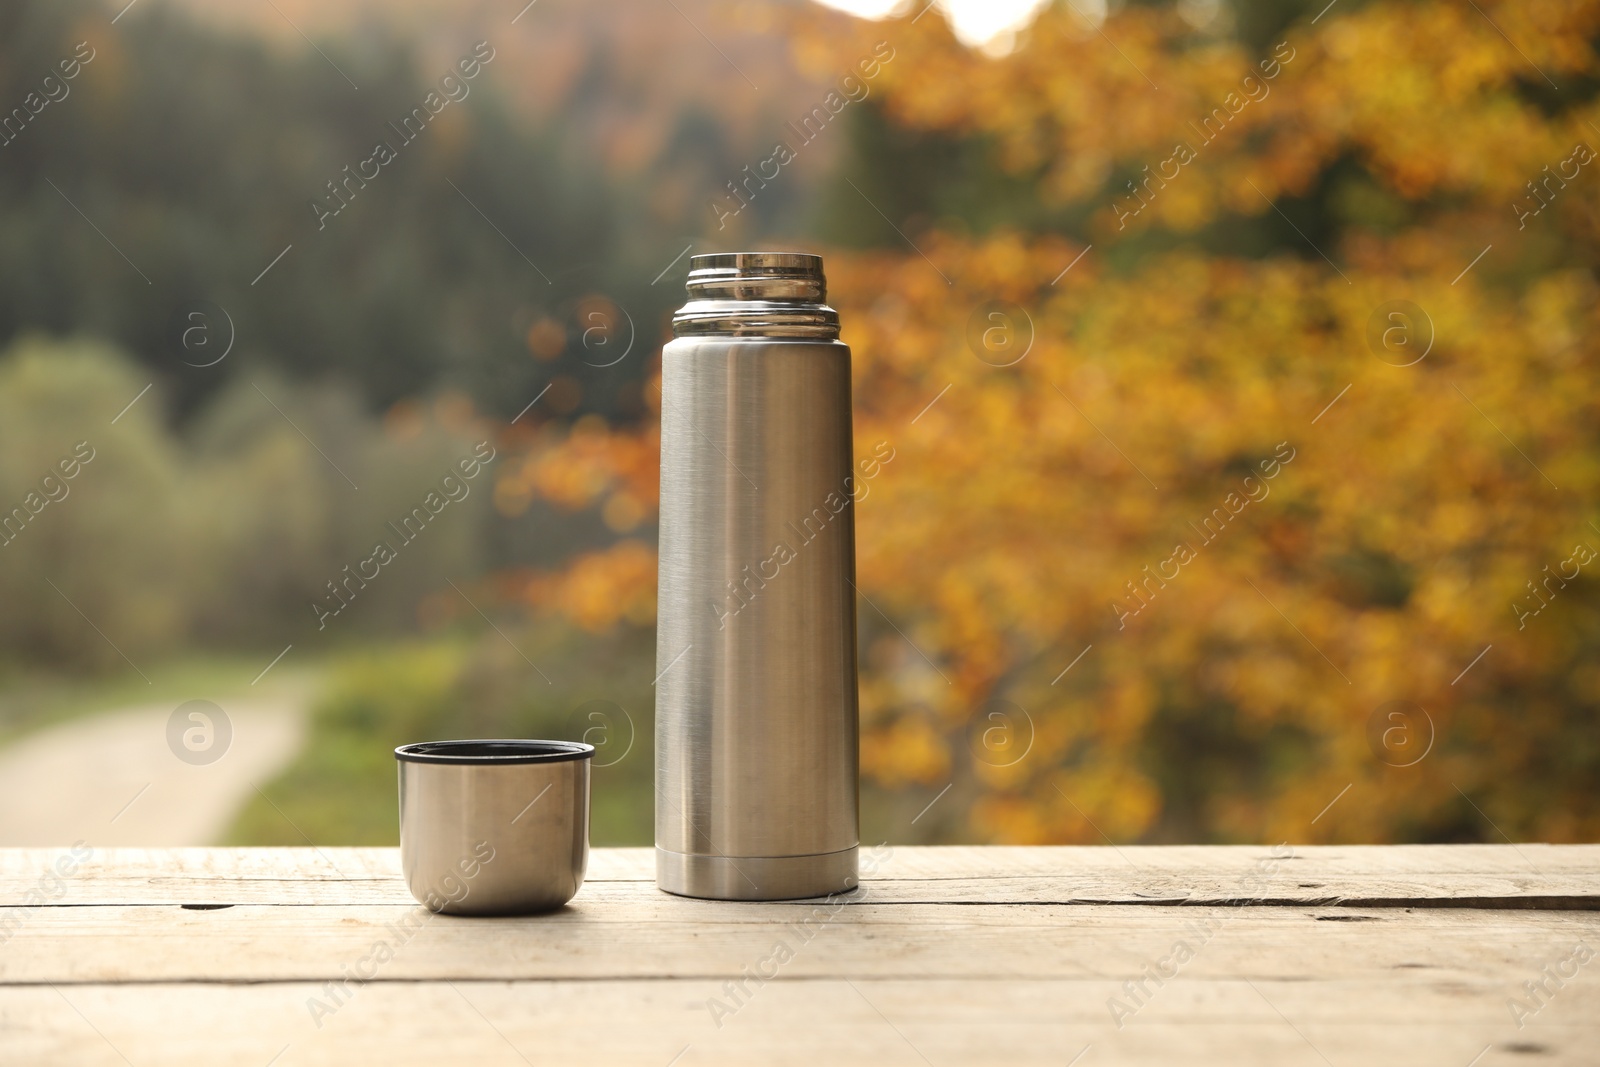 Photo of Metallic thermos and cup lid on wooden table outdoors, space for text